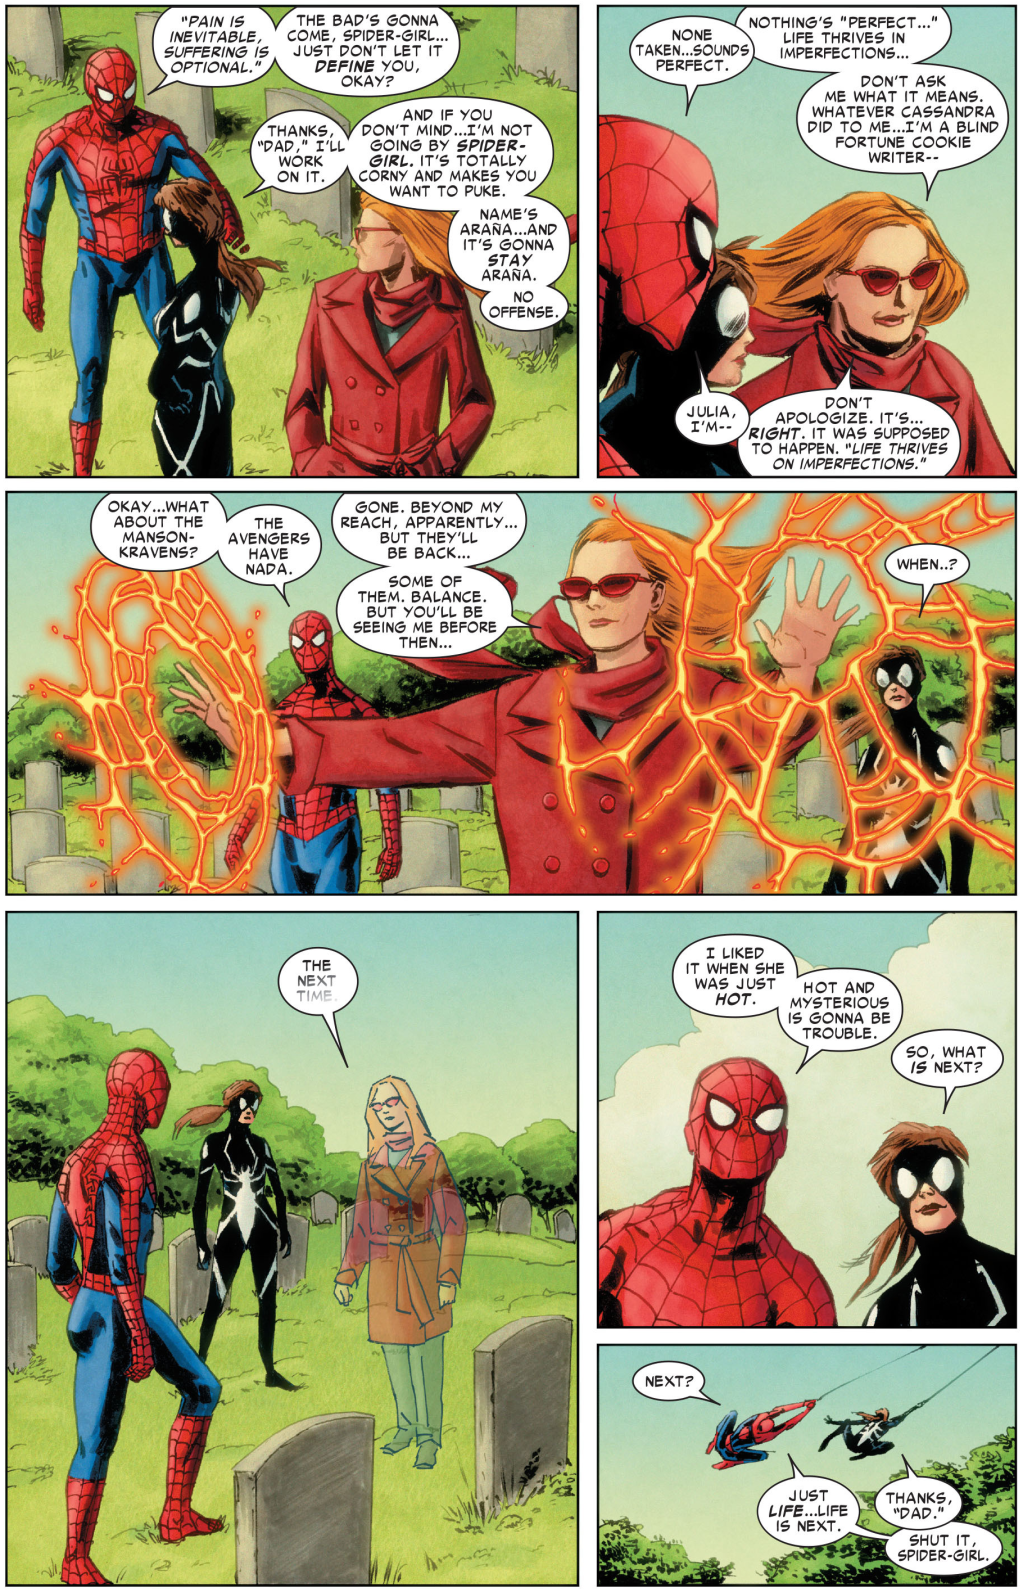 A single page proves why Spider-Man is needed for his supporting cast to actually work in 
Amazing Spider-Man Vol. 1 #637 "Grim Hunt: Conclusion" (2010), Marvel Comics. Words by Joe Kelly, art by Michael Lark, Marcho Checchetto, Stefano Gaudiano, Matt Southworth, Brian Thies, Matt Hollingsworth, and Joe Caramagna.